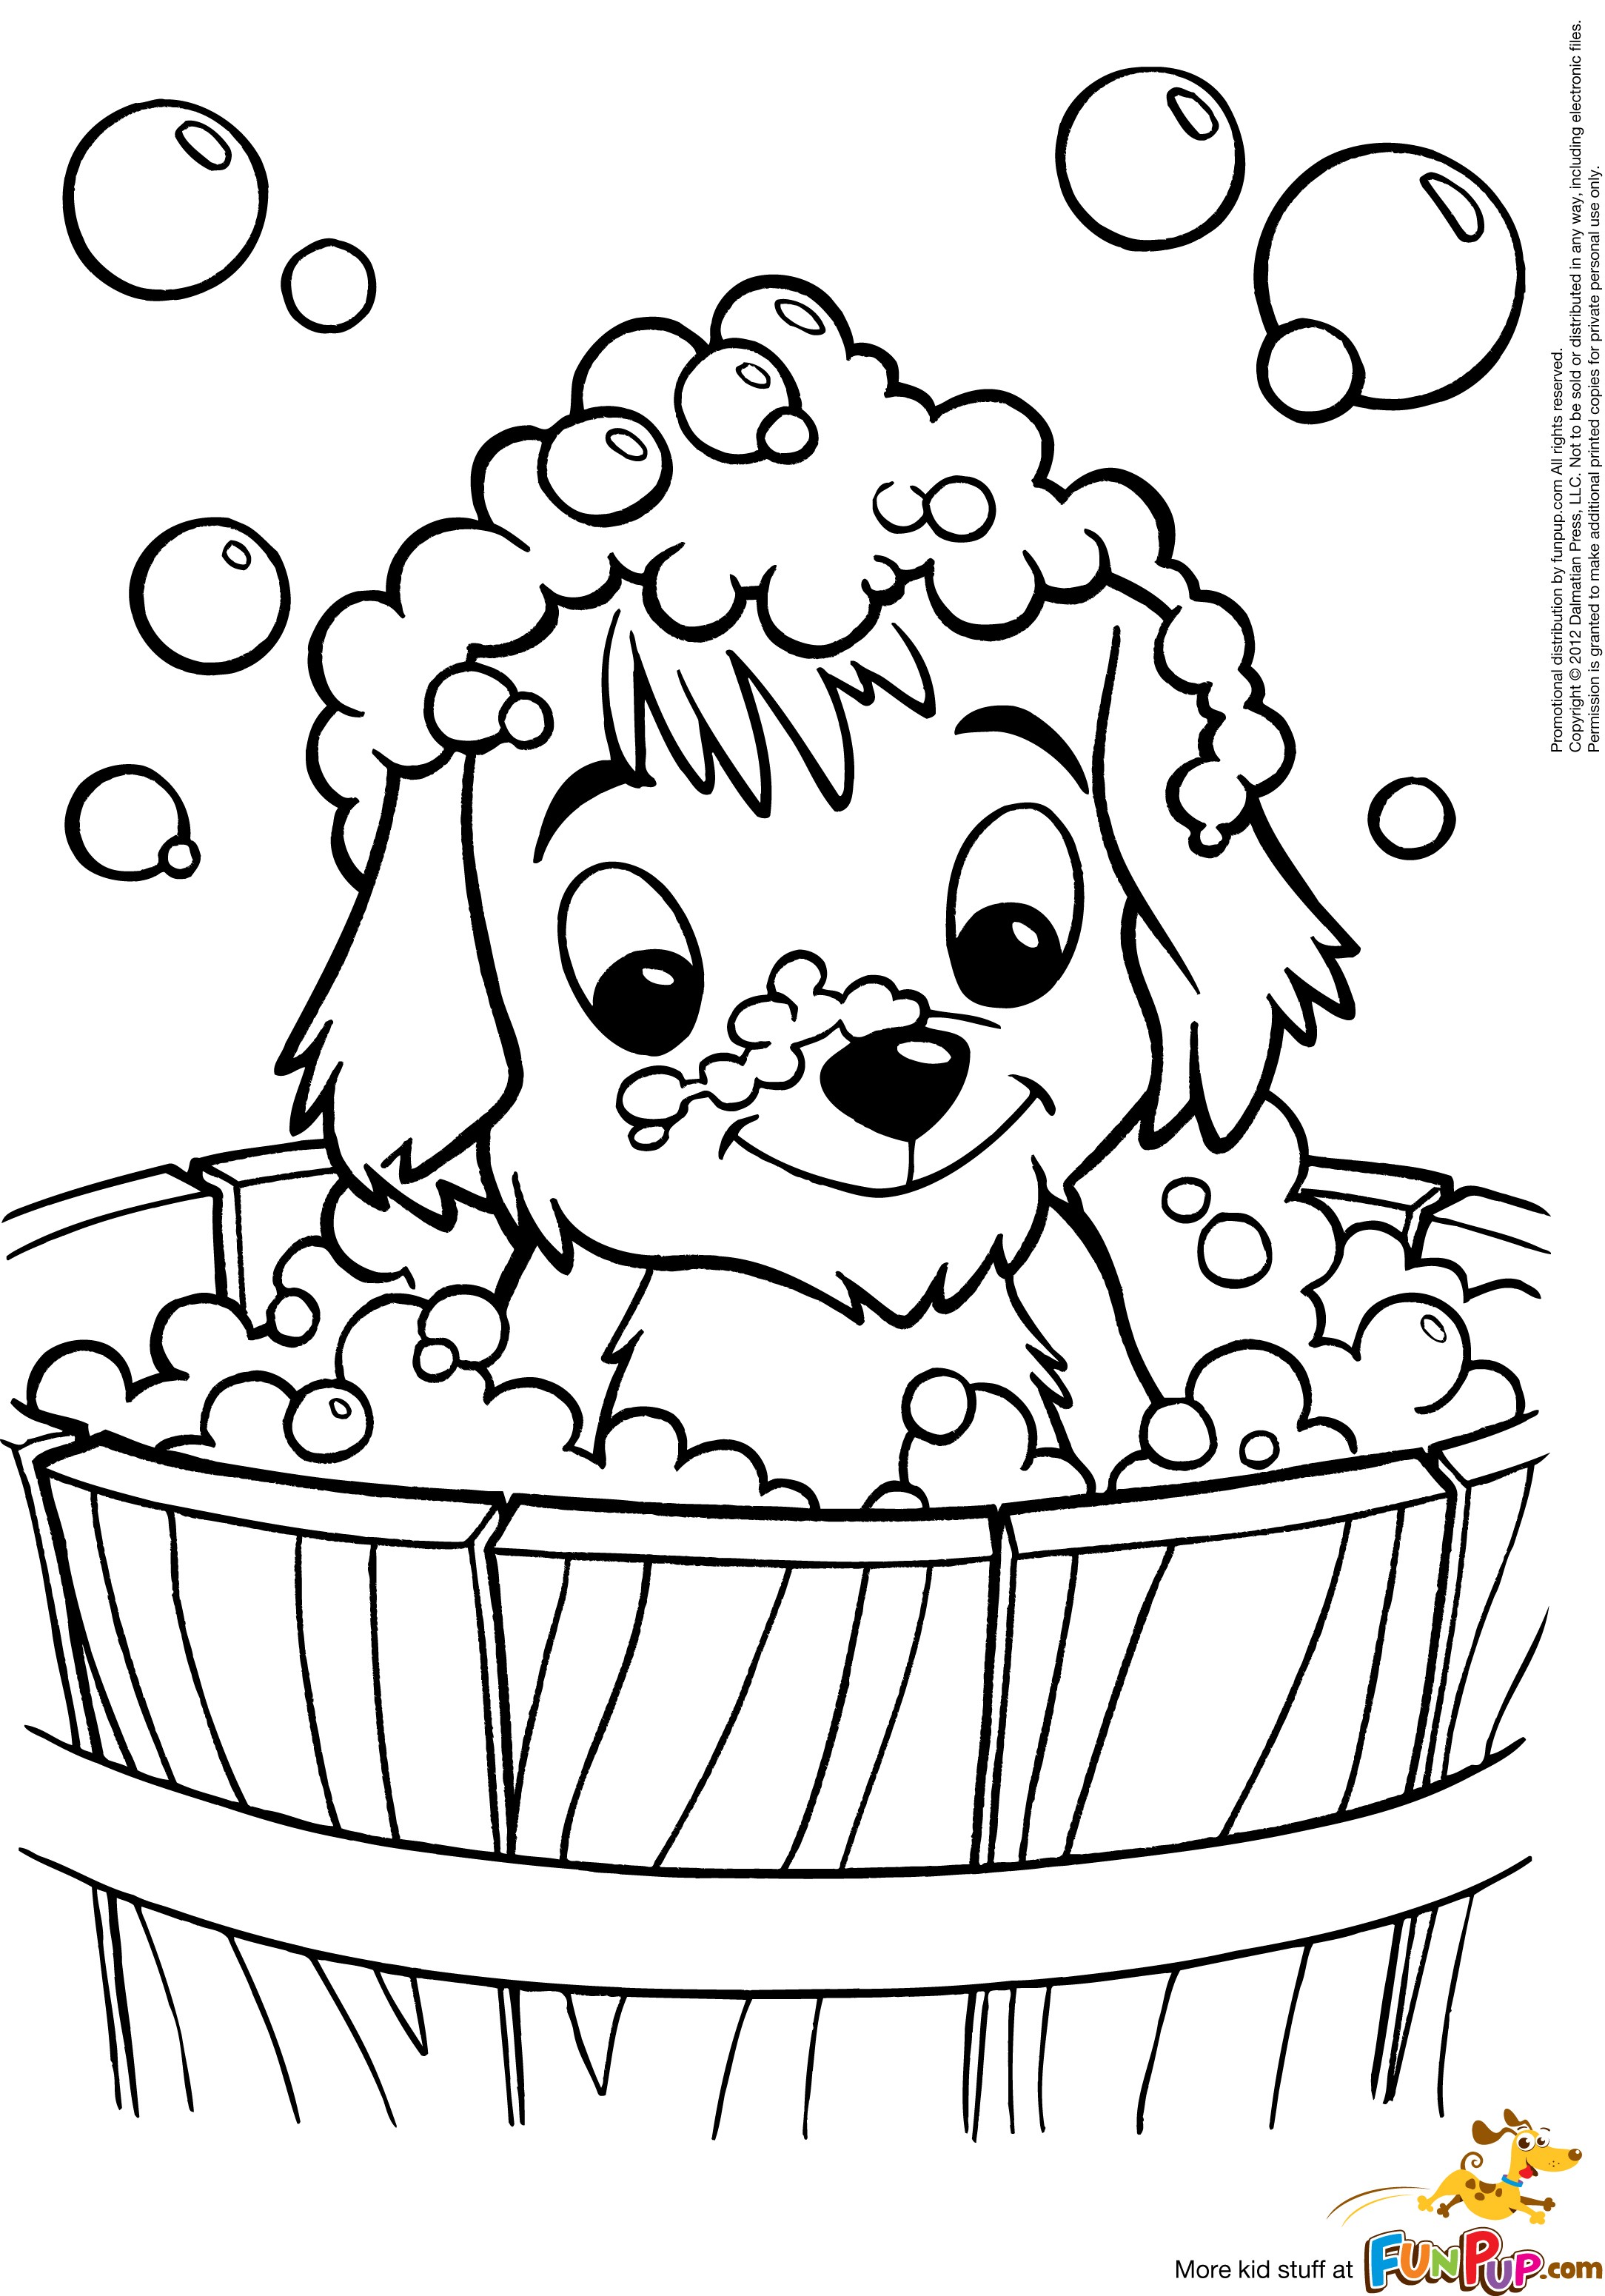 Free Printable Coloring Sheets Of Puppies